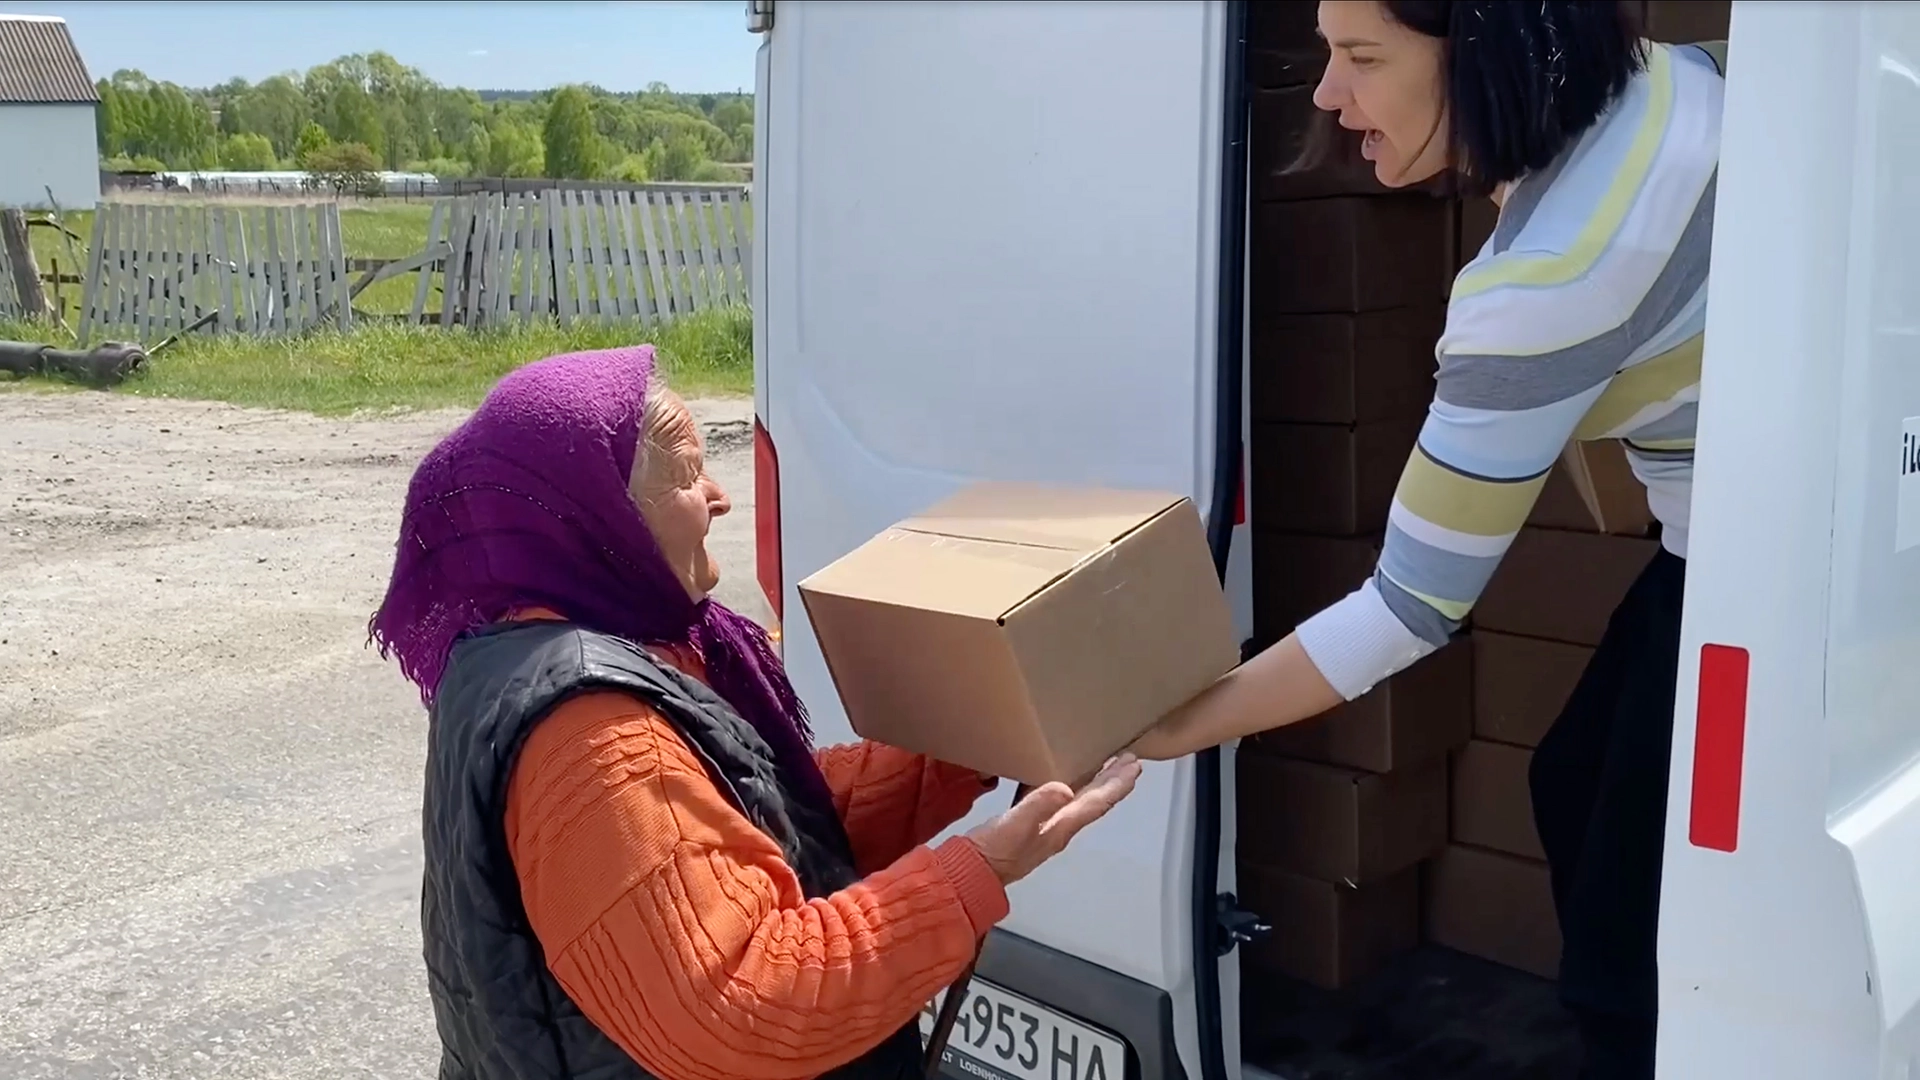 iLoveUkraine volunteer in Kyiv suburbs handing humanitarian aid package to a grandmother from a truck.